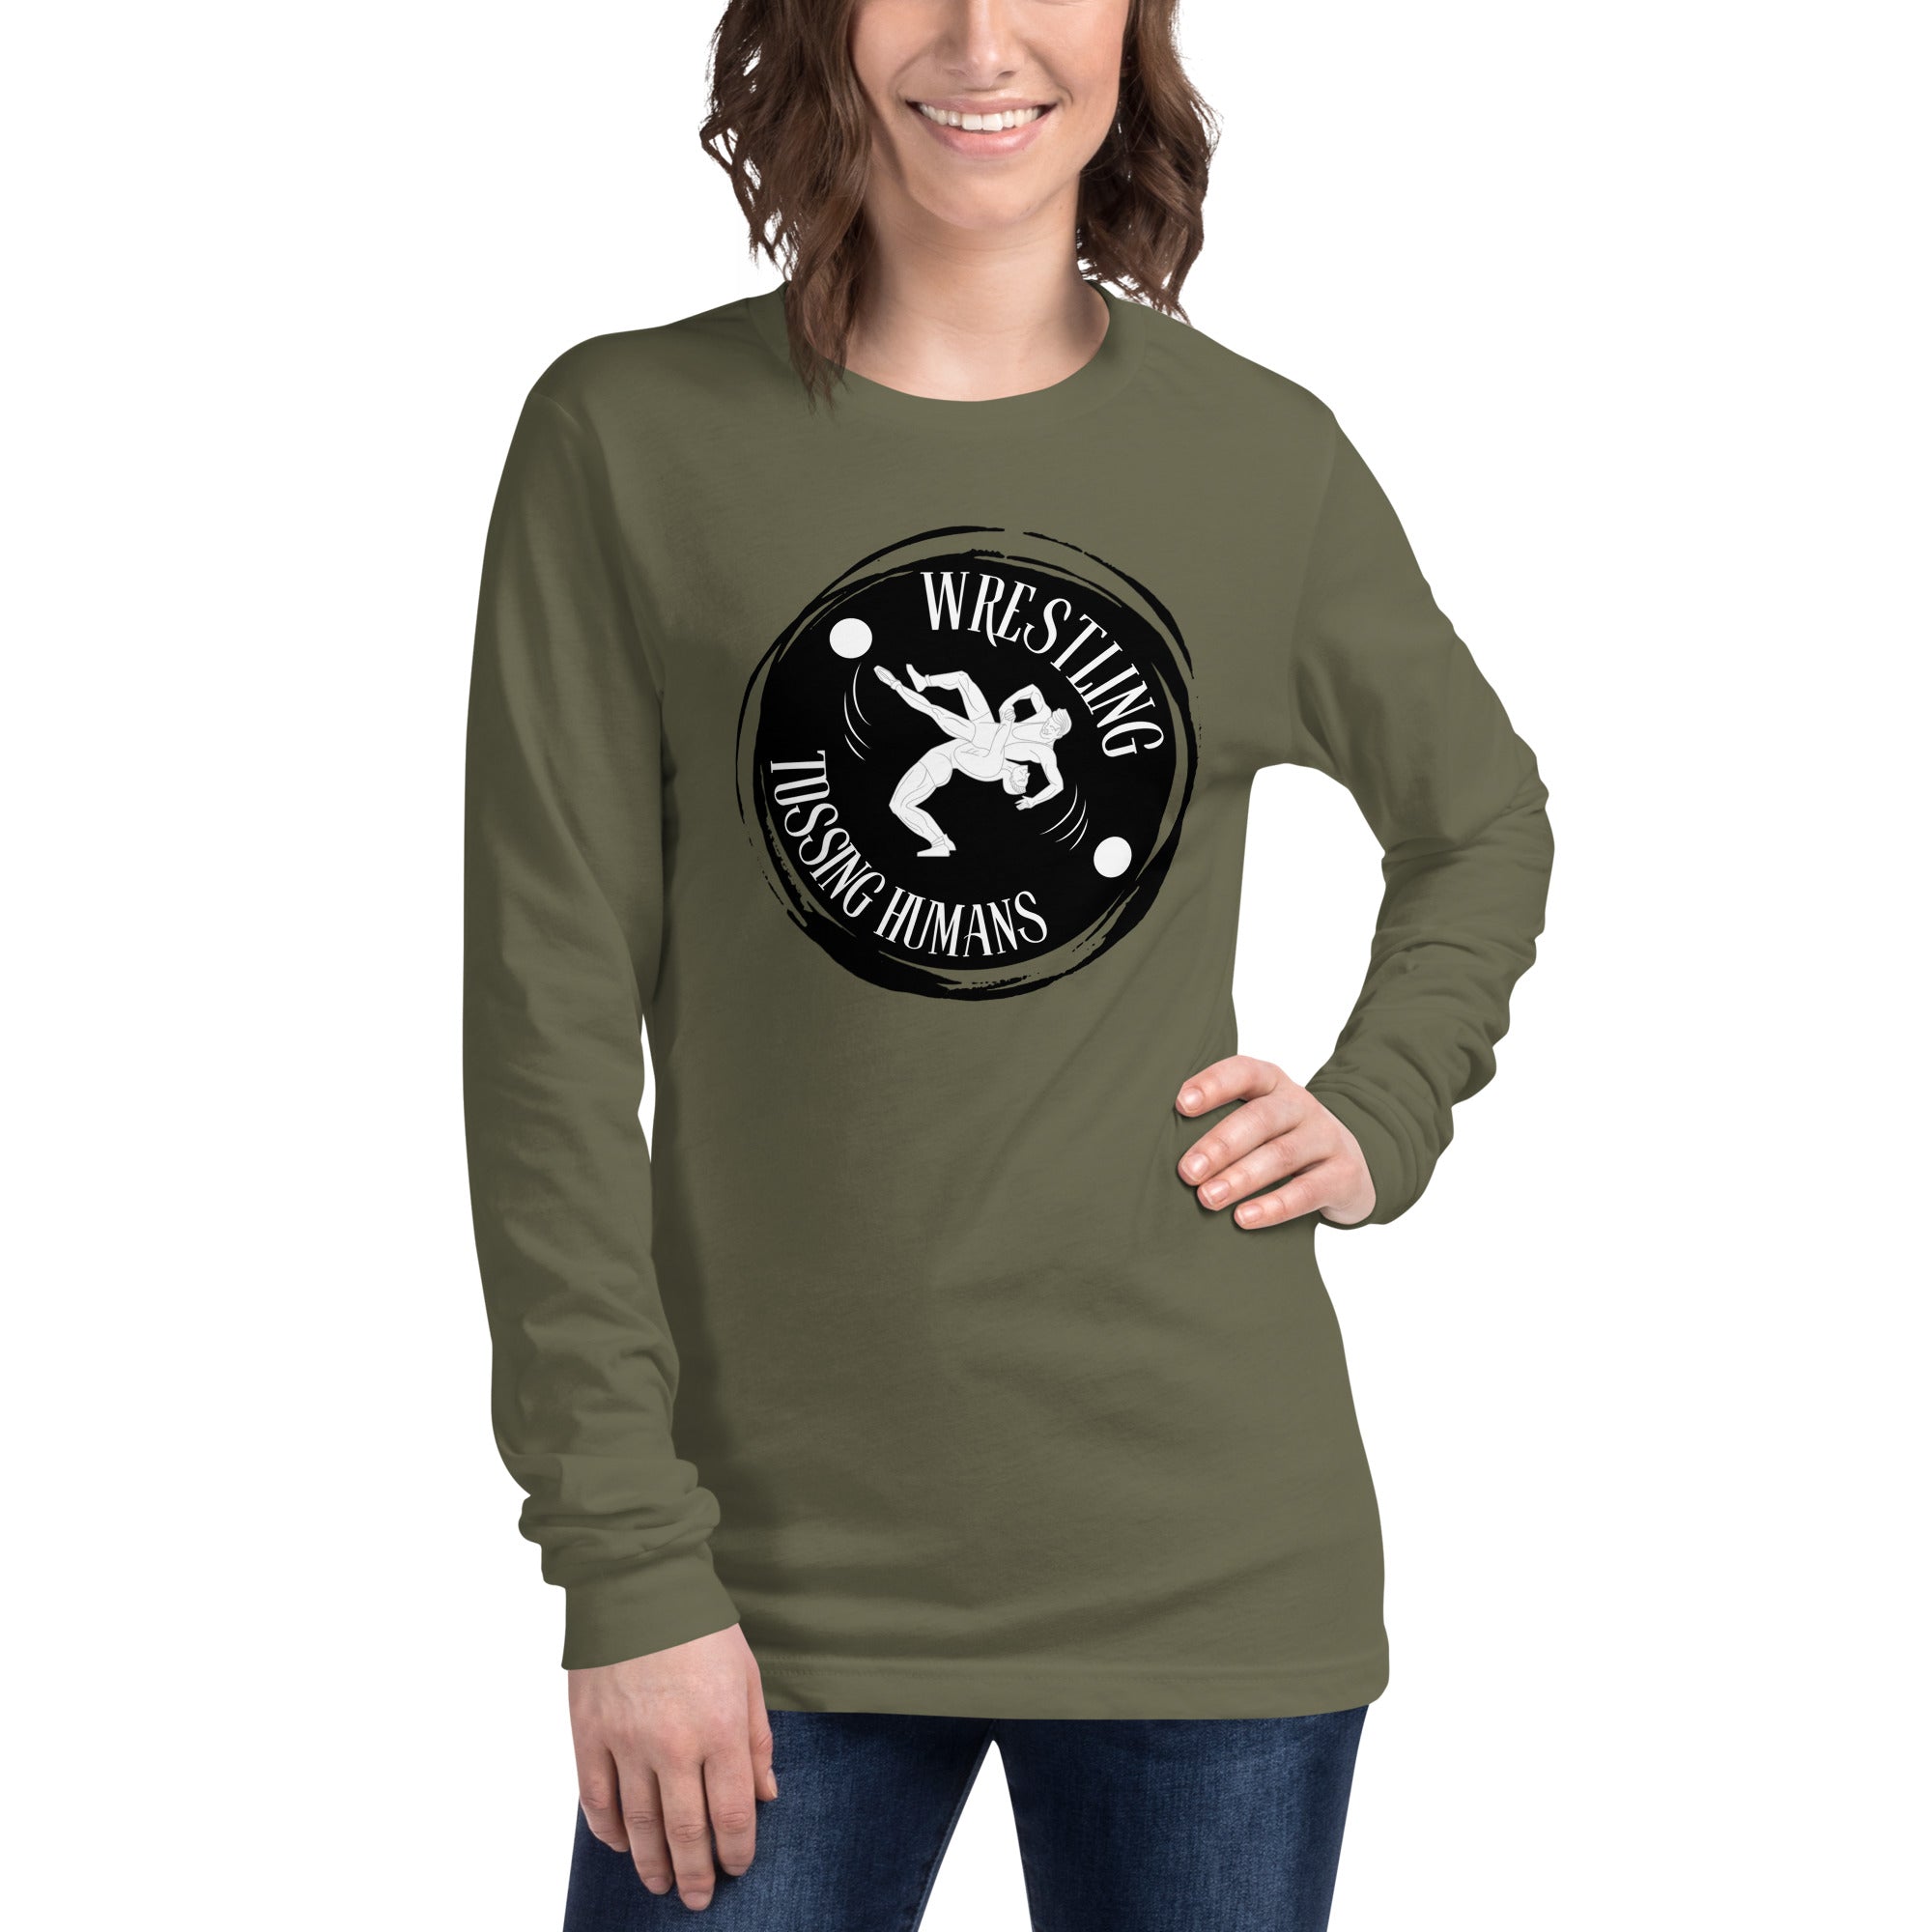 Wrestling Tossing Humans Women's Select Long Sleeve